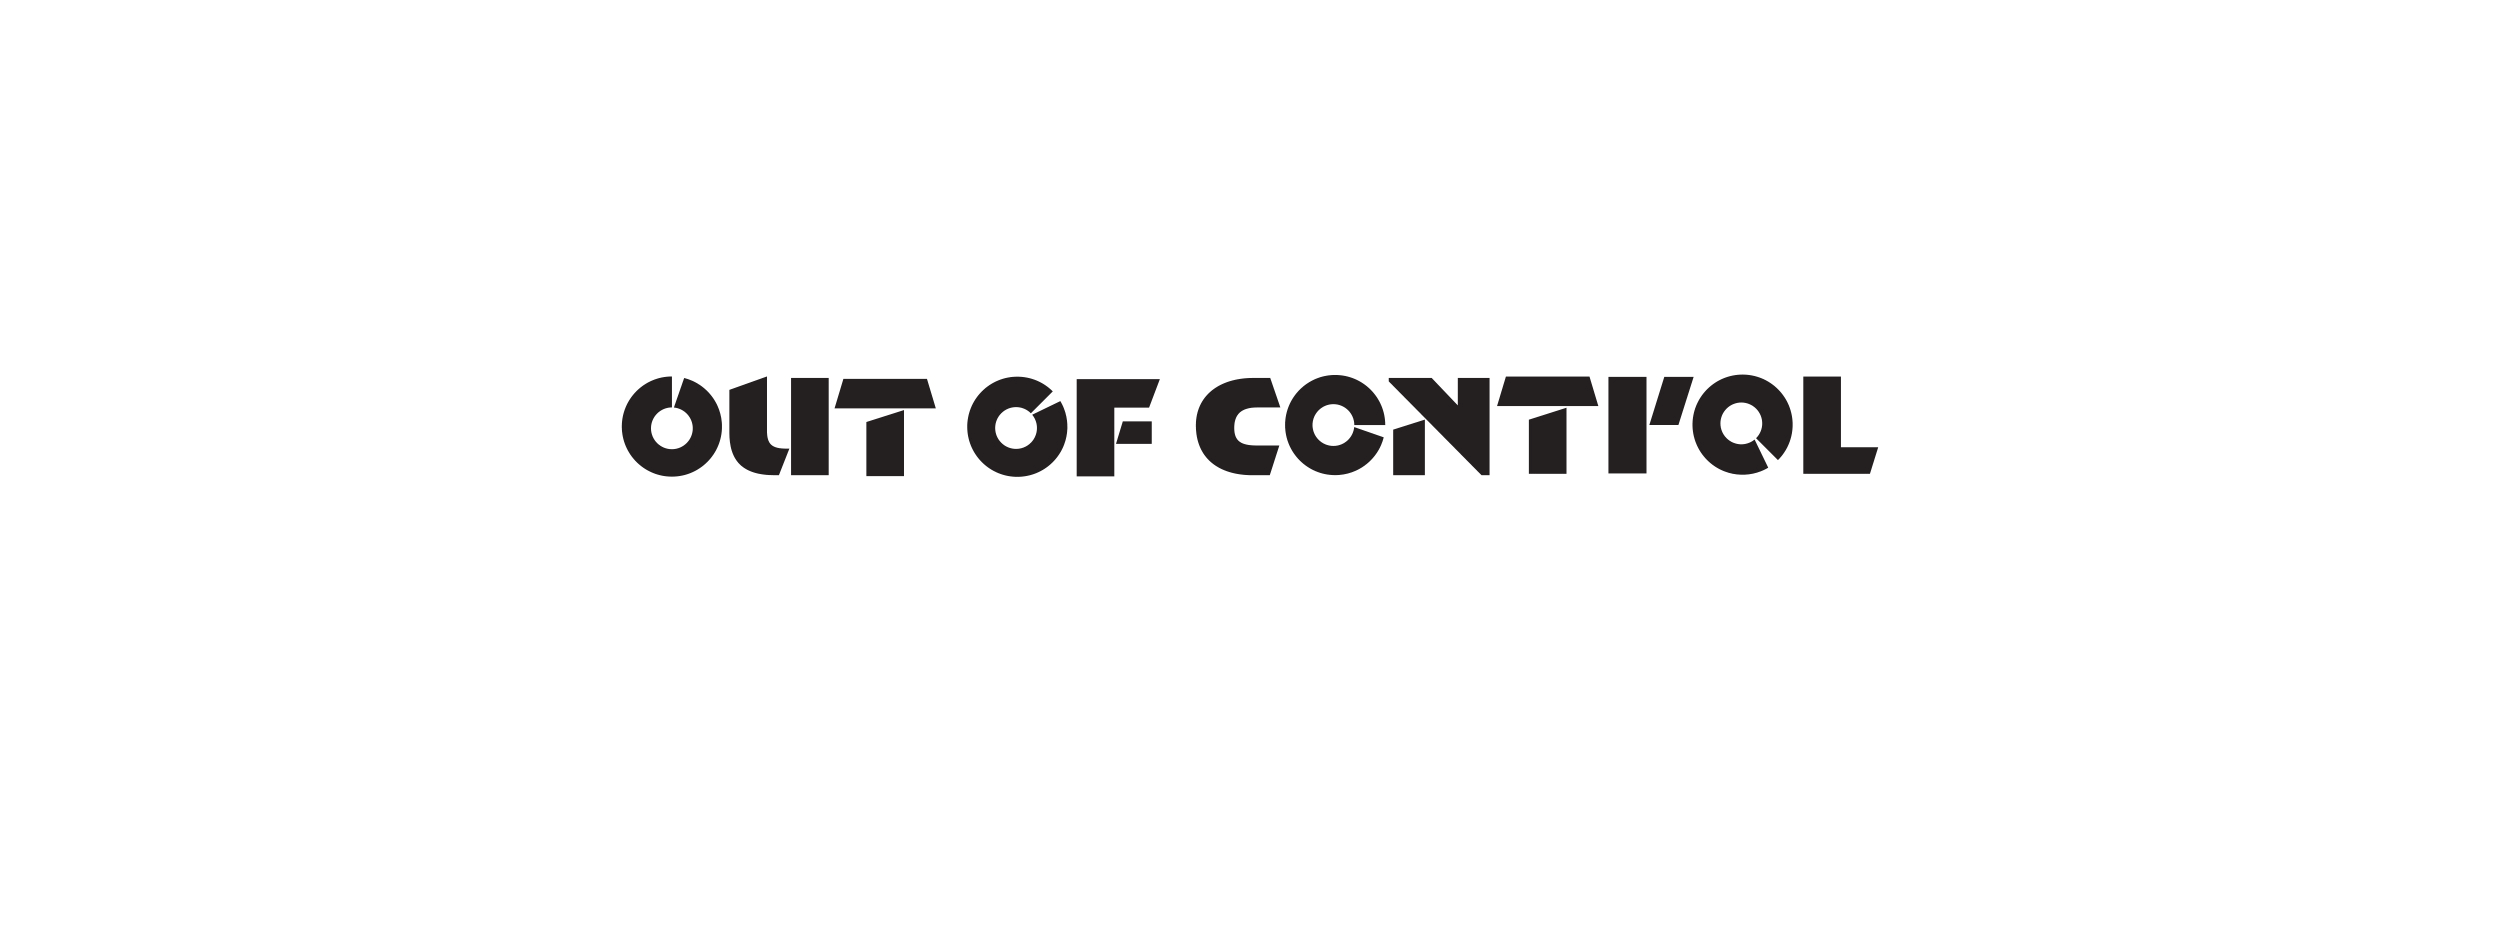 Out of Control: The Concrete Art of Skateboarding, Audain Art Museum 3